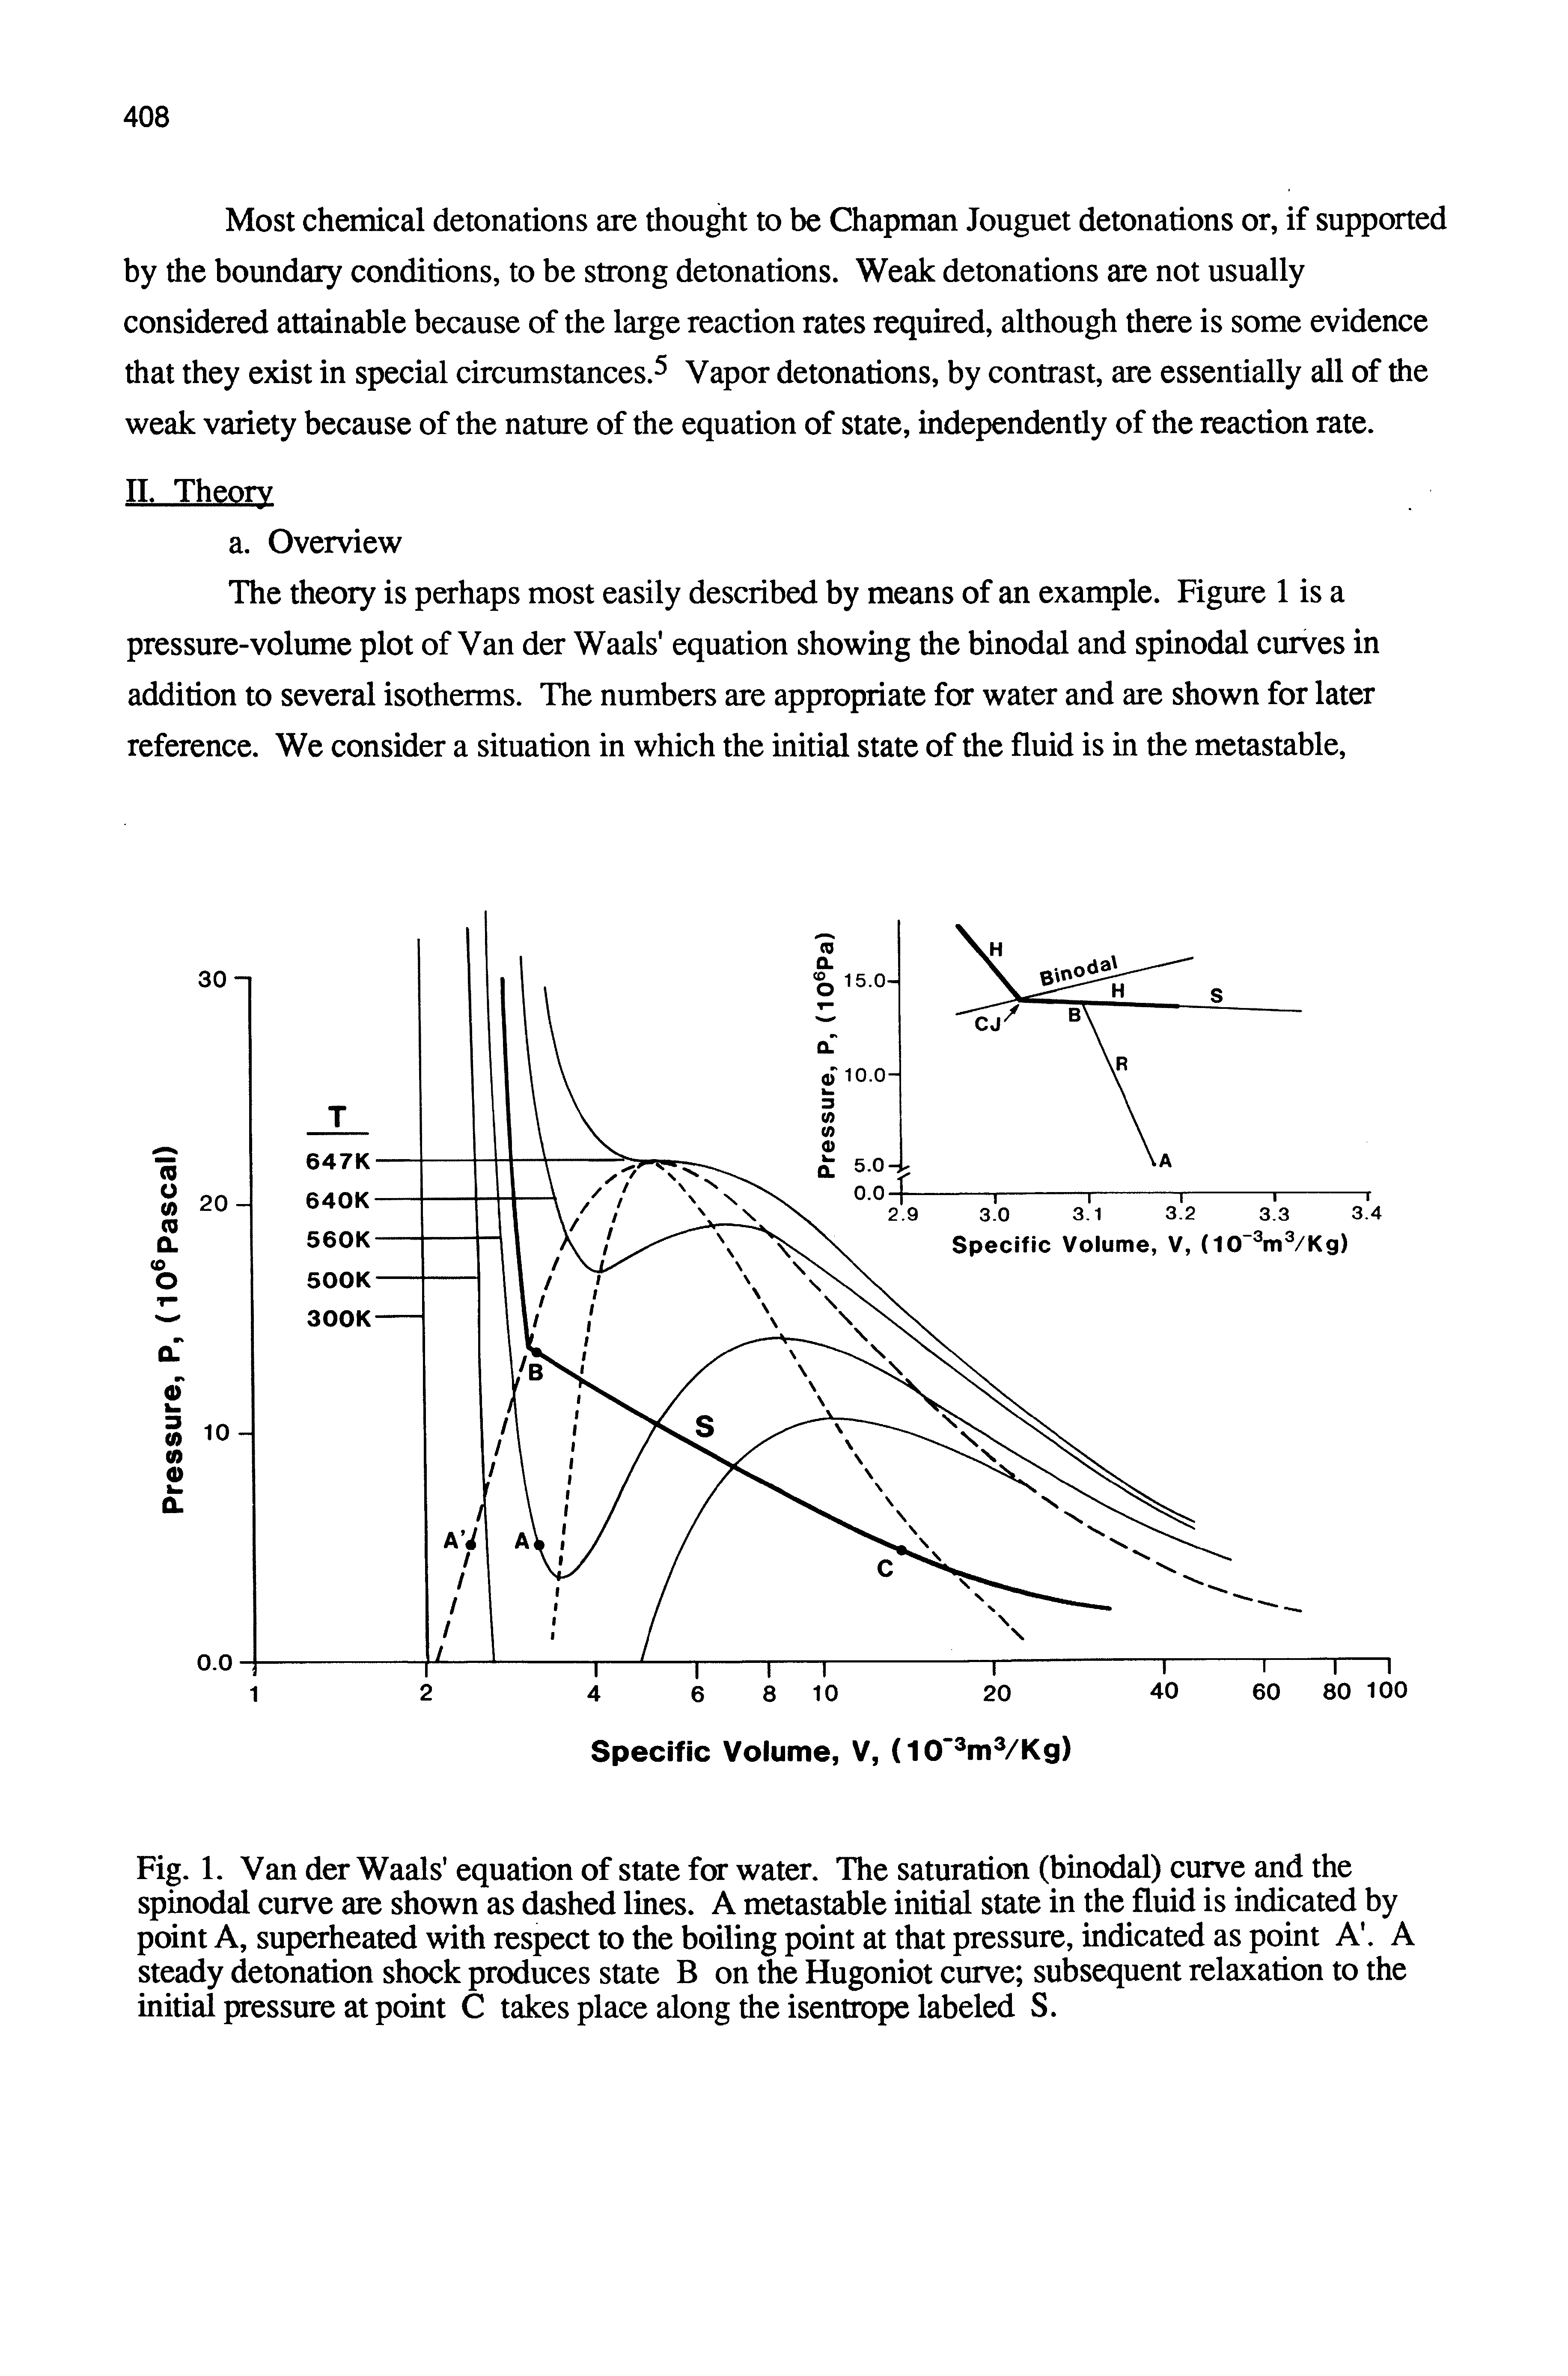 Fig. 1. Van der Waals equation of state for water. The saturation (binodal) curve and the spinodal curve are shown as dashed lines. A metastable initial state in the fluid is indicated by point A, superheated with respect to the boiling point at that pressure, indicated as point A . A steady detonation shock produces state B on the Hugoniot curve subsequent relaxation to the initial pressure at point C takes place along the isentrope labeled S.